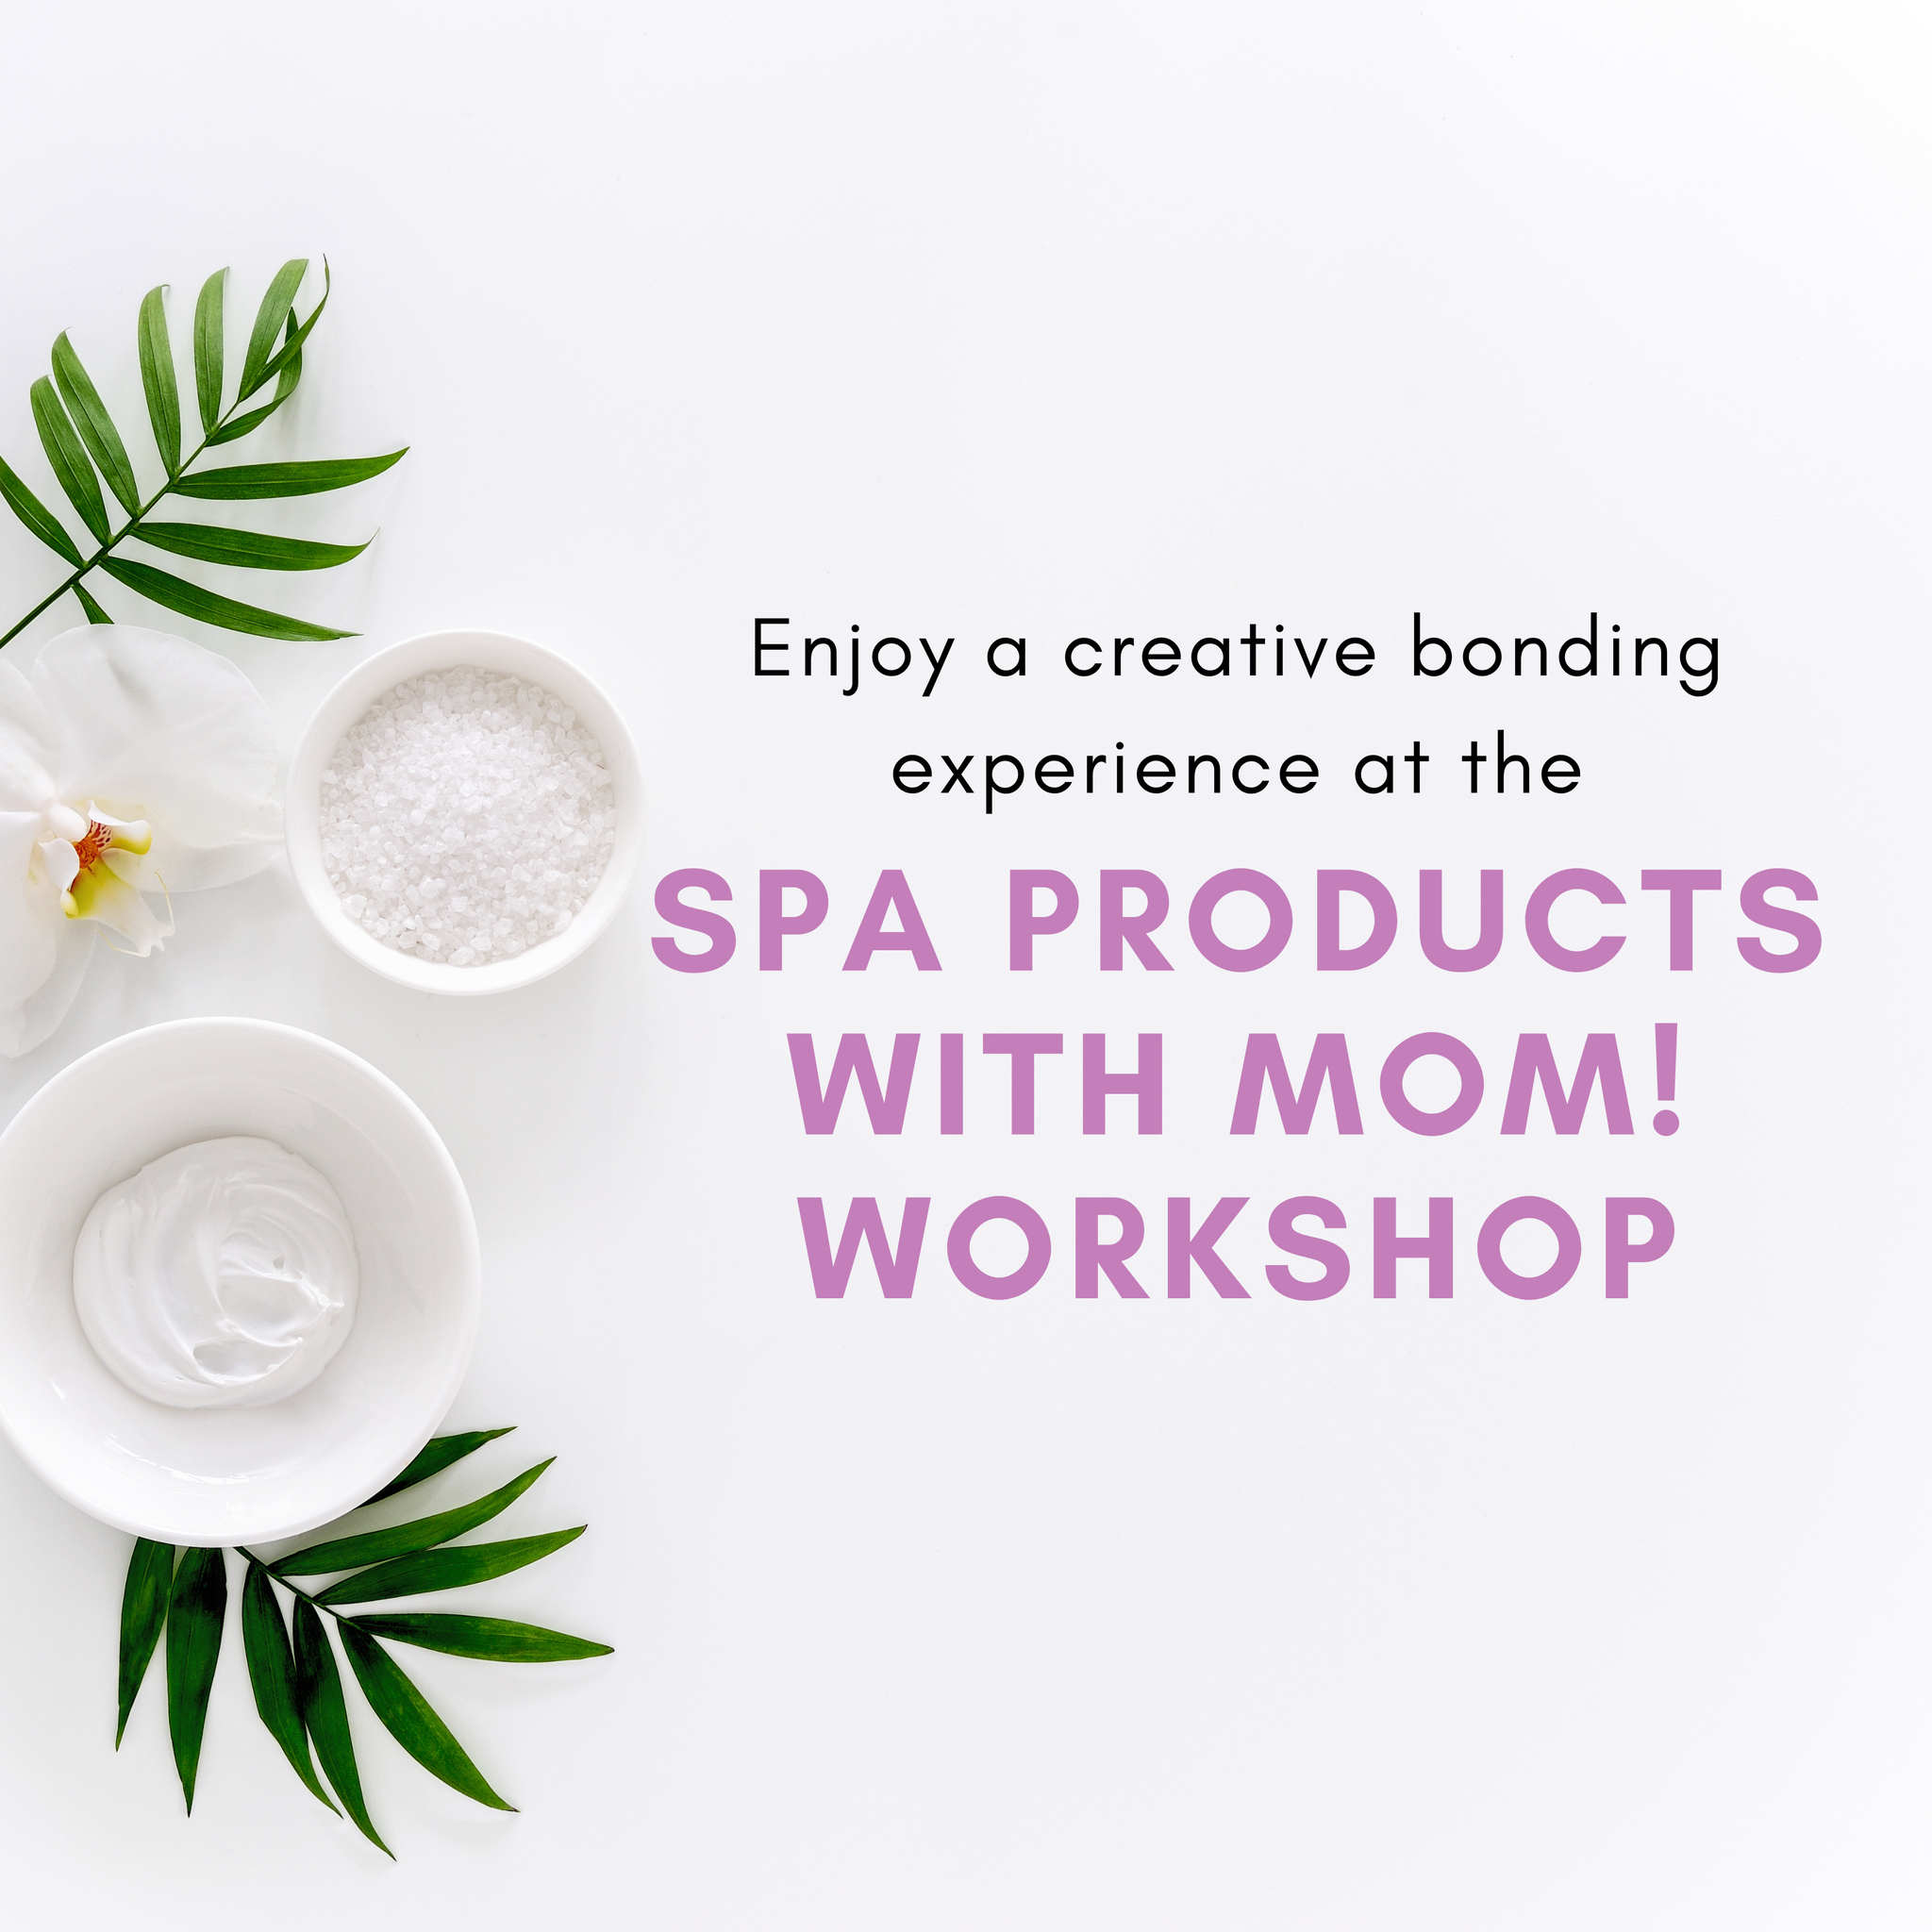 SPA Products with Mom! Workshop